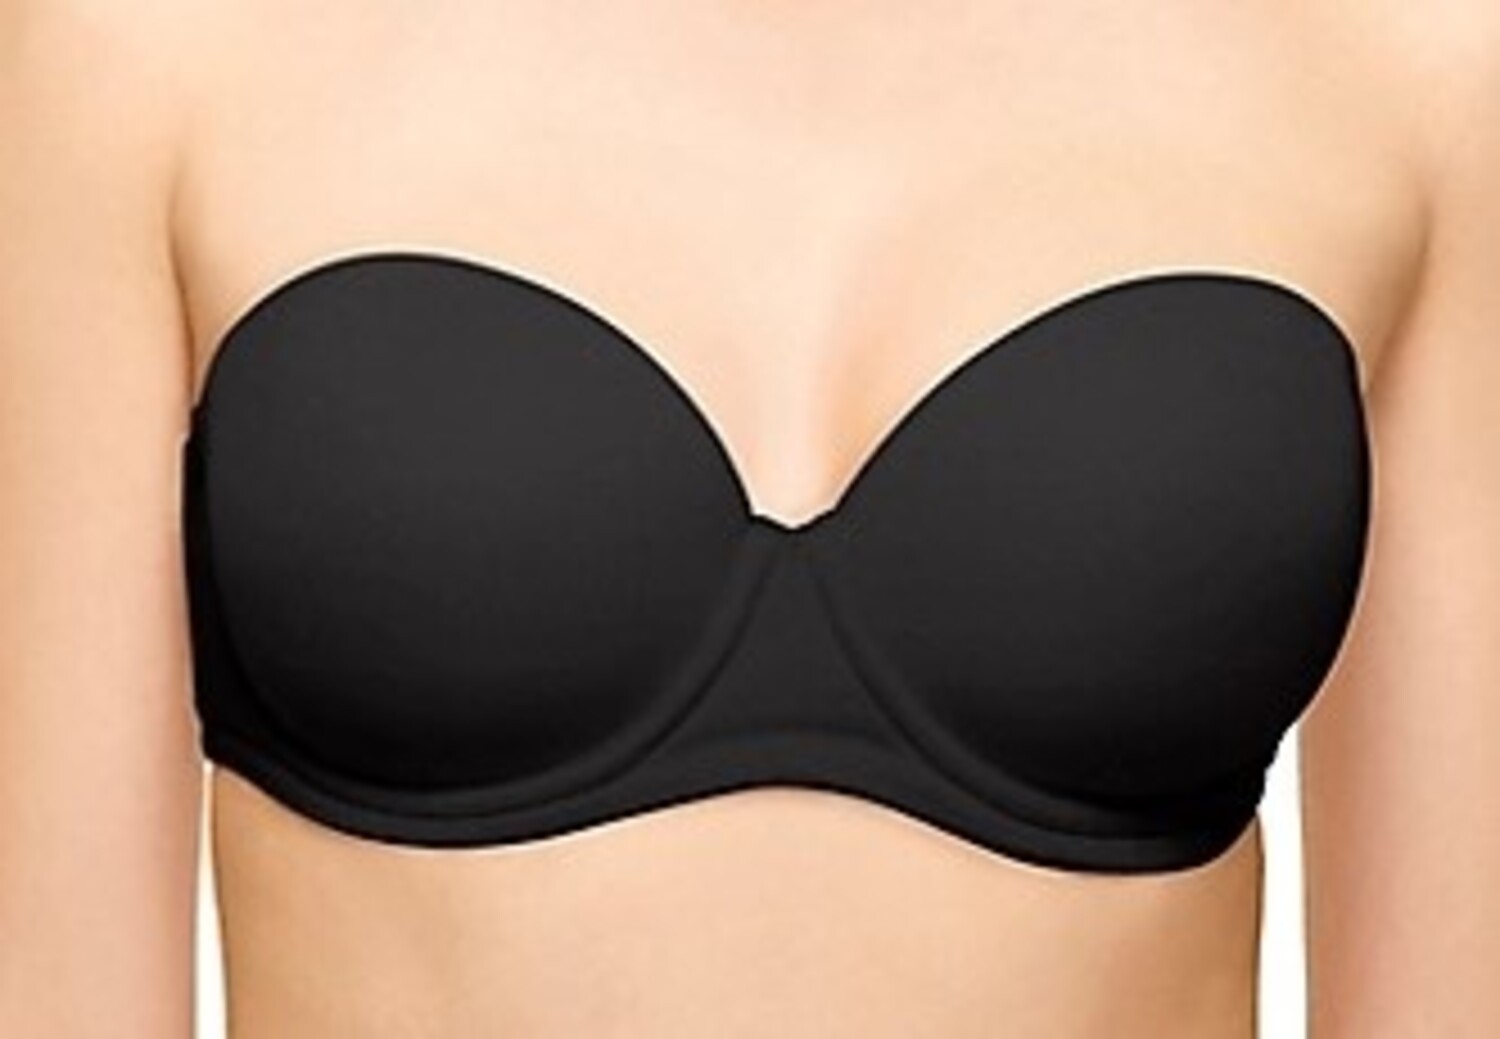 Wacoal Red Carpet Strapless Bra in Sand - Busted Bra Shop